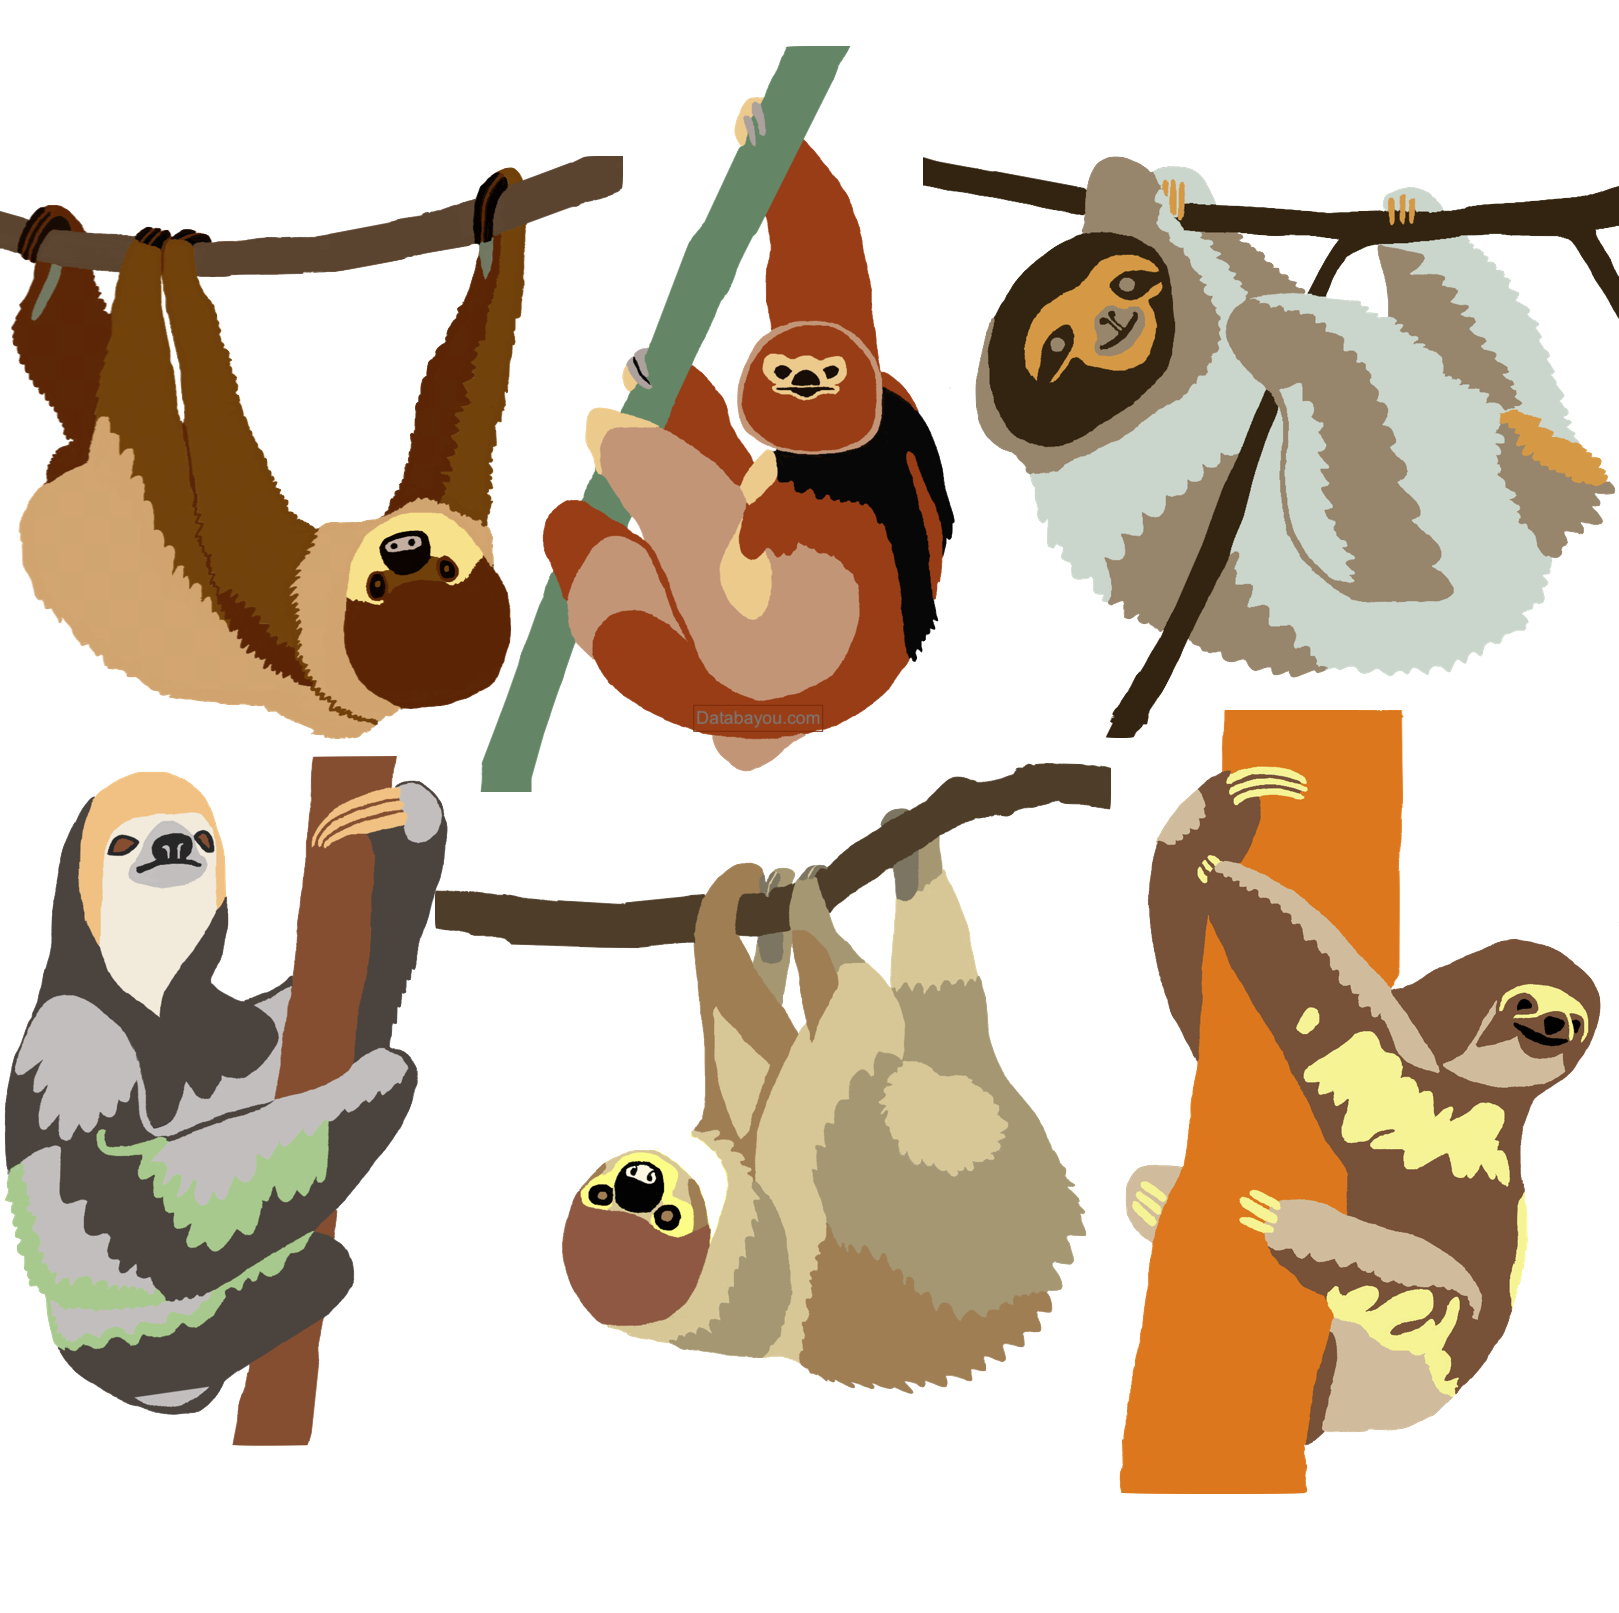 All Sloth Species